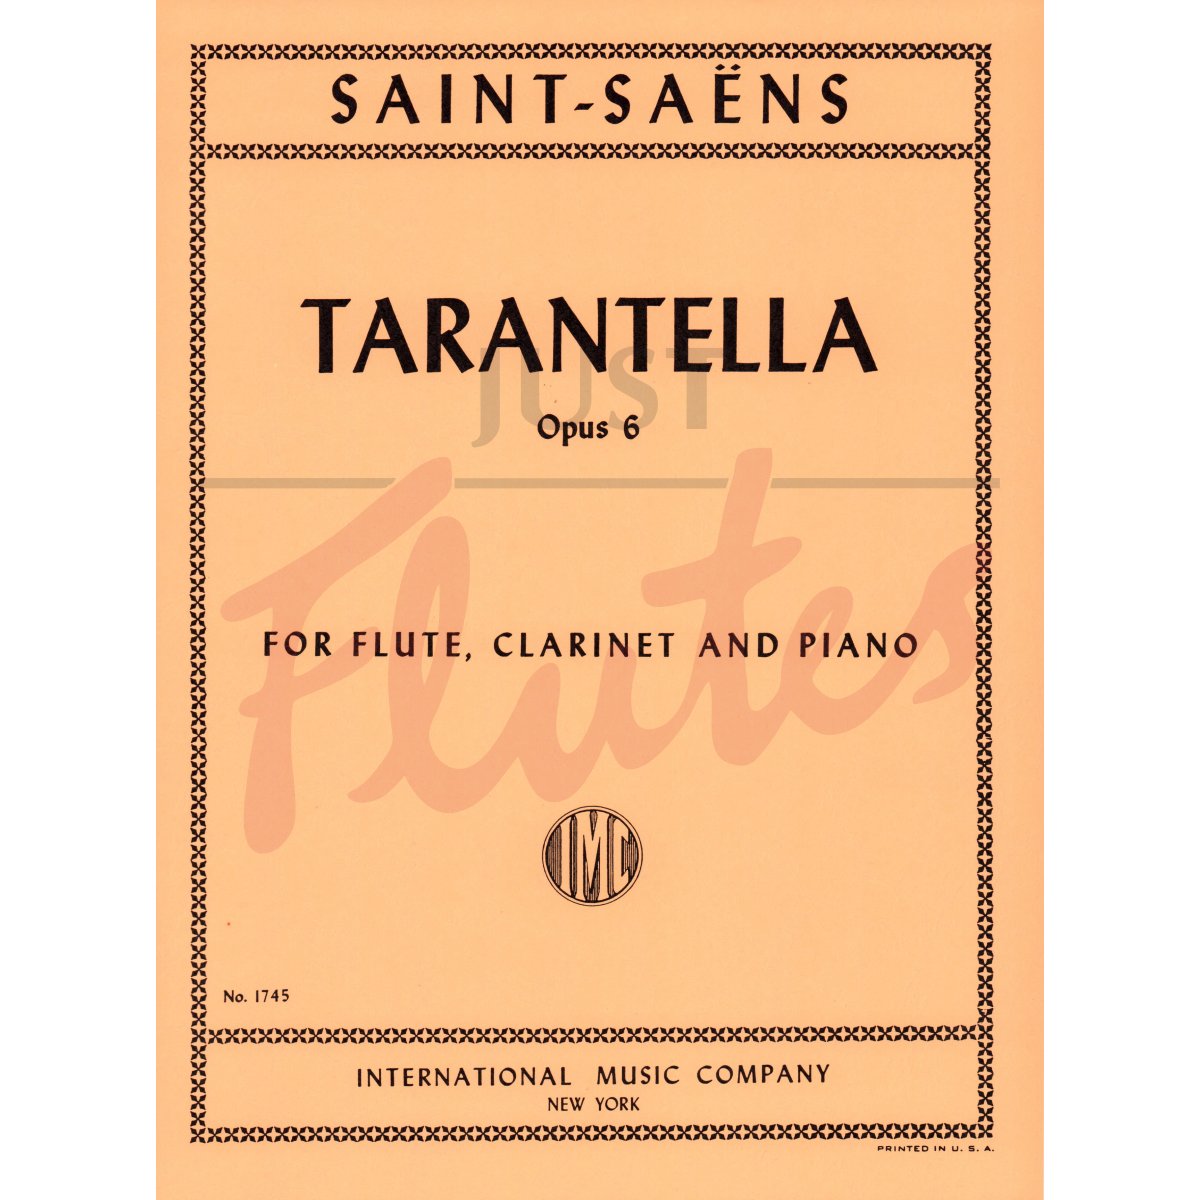 Lemon very much Armory Camille Saint-Saëns: Tarantella for Flute, Clarinet and Piano, Op6